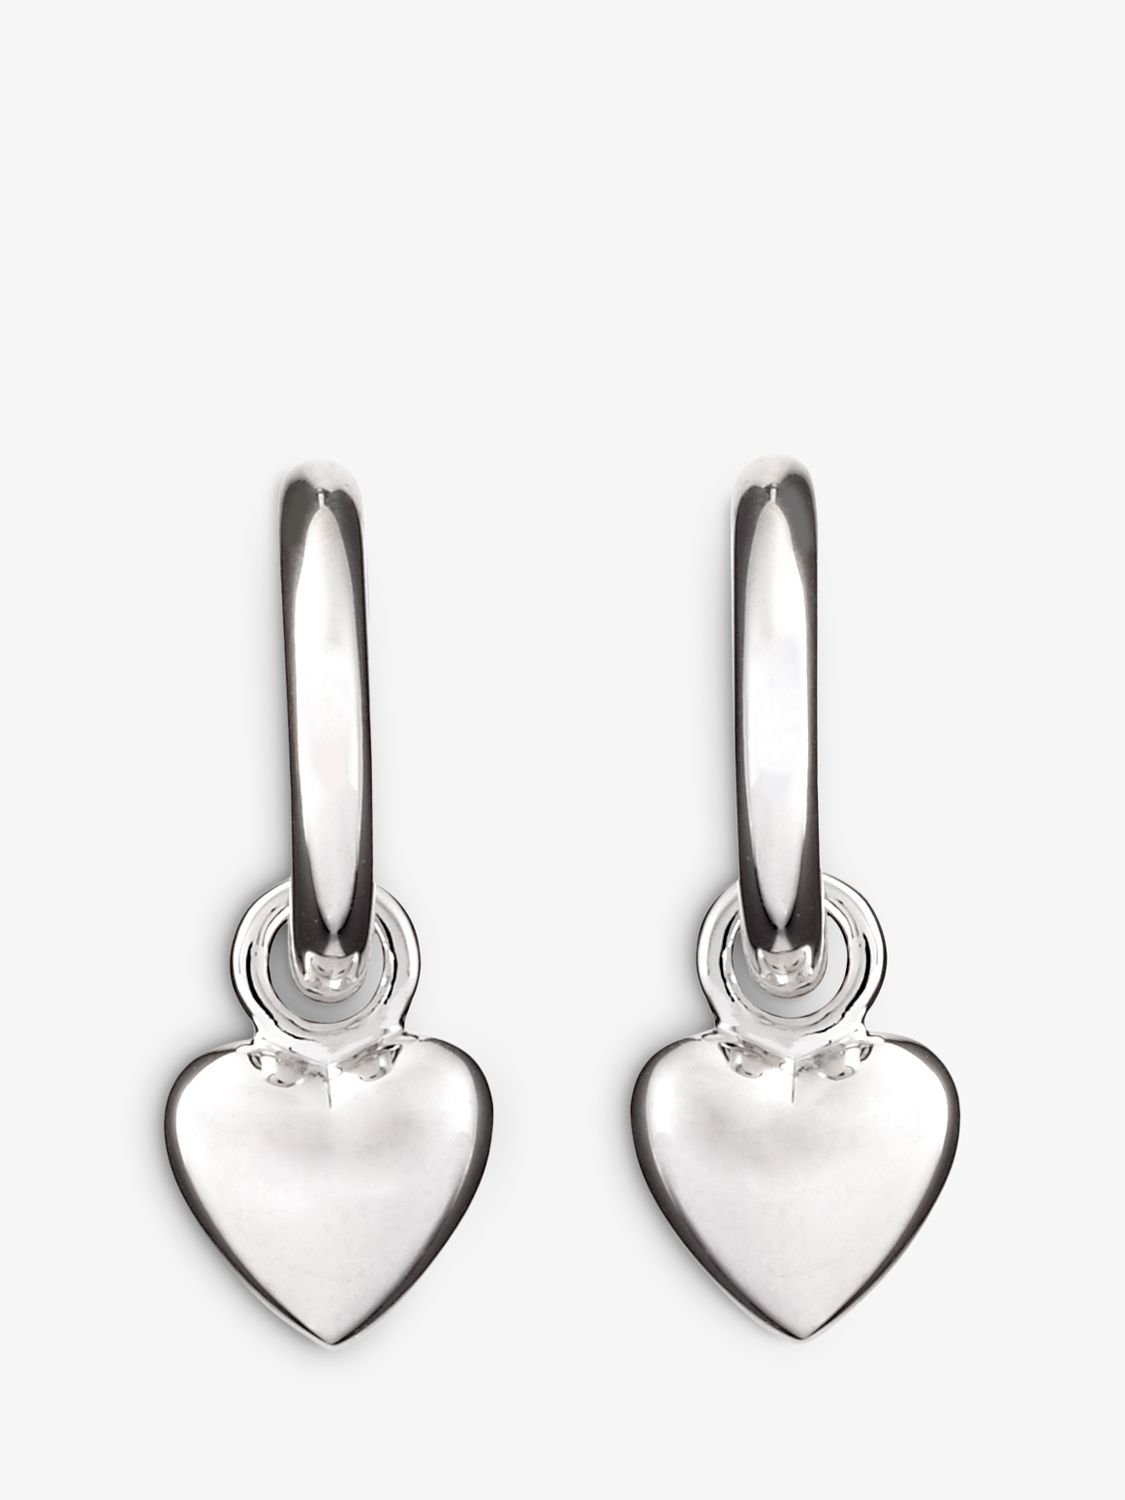 Eclectica Pre-Loved Heart Pendant Hoop Earrings, Dated Circa 1990s, Silver